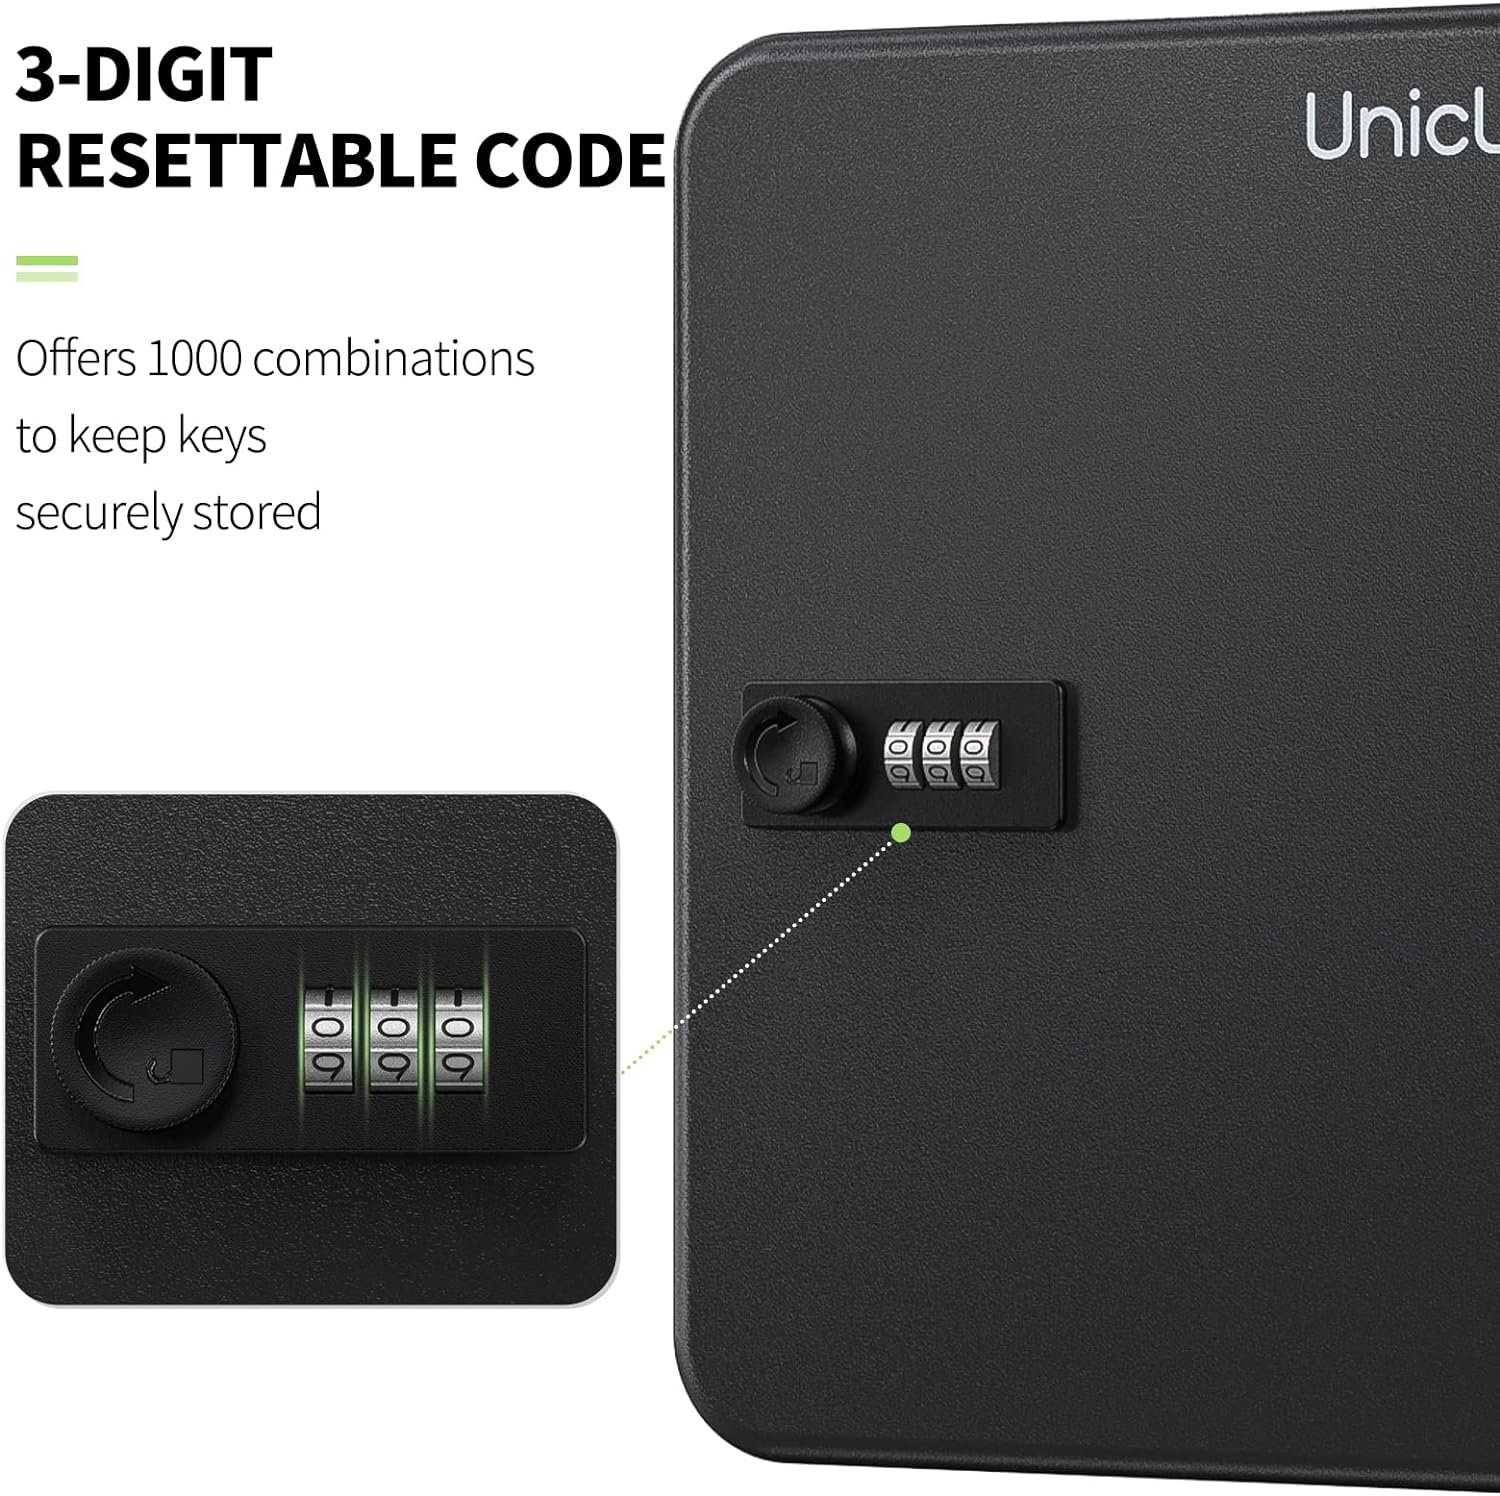 Uniclife Key Cabinet Review